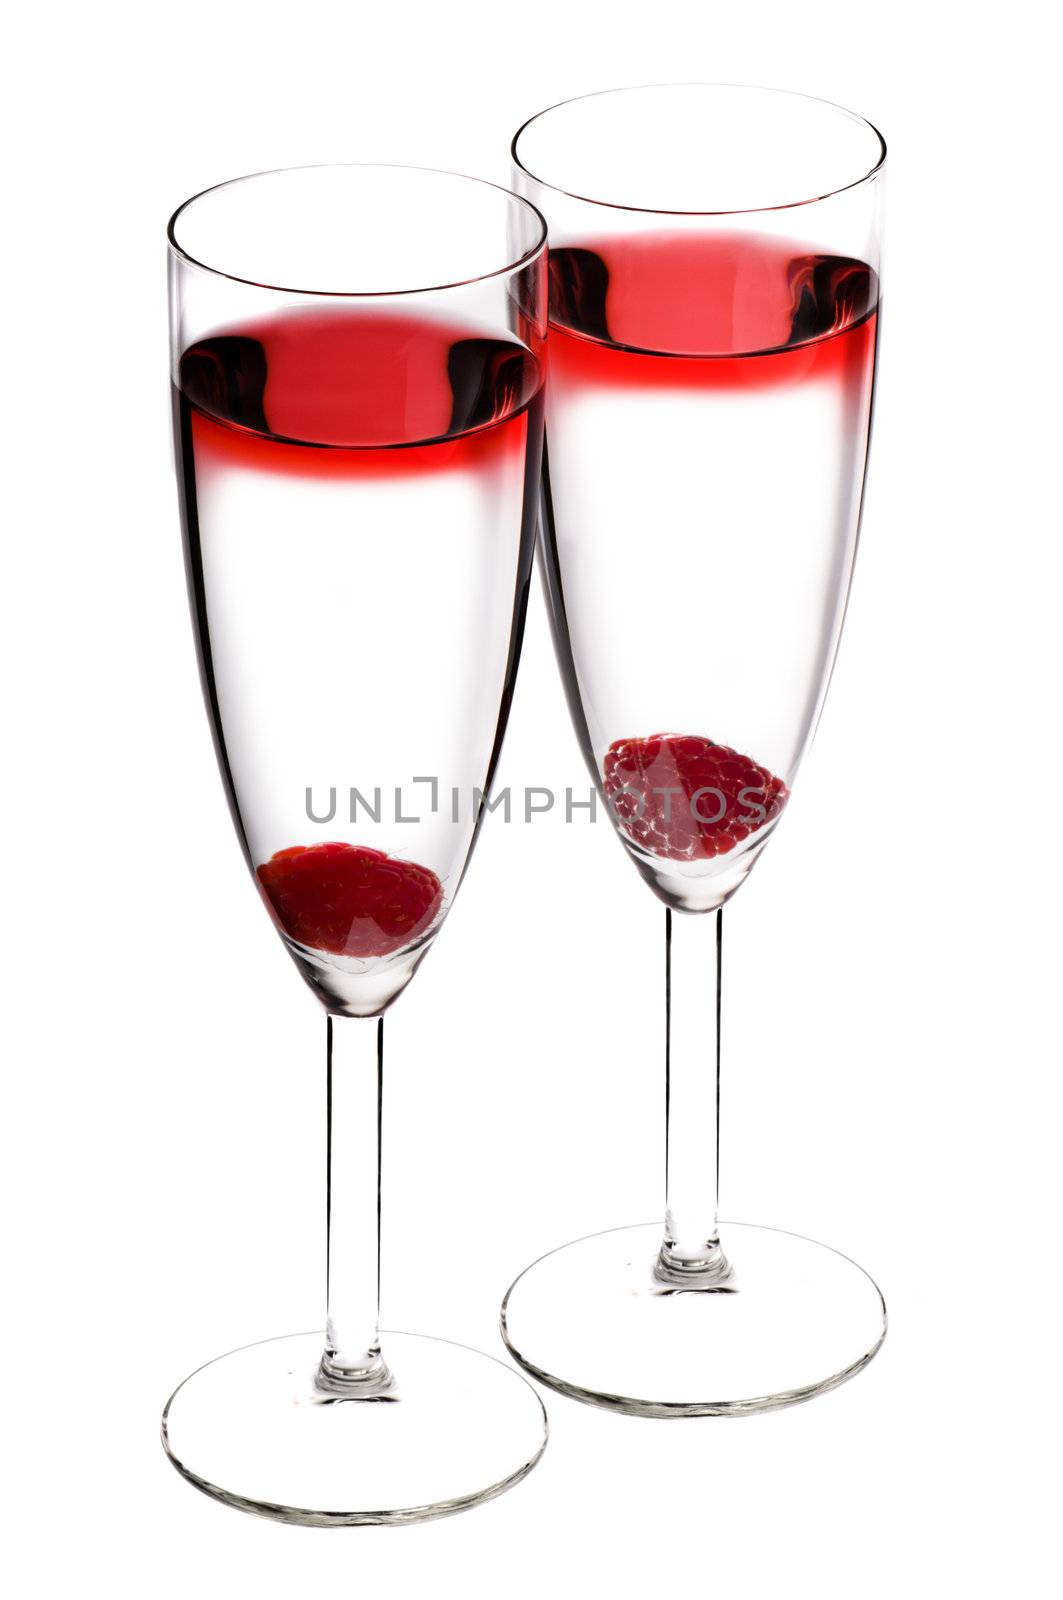 Designer cocktail isolated over white with raspberry in Champaign flute